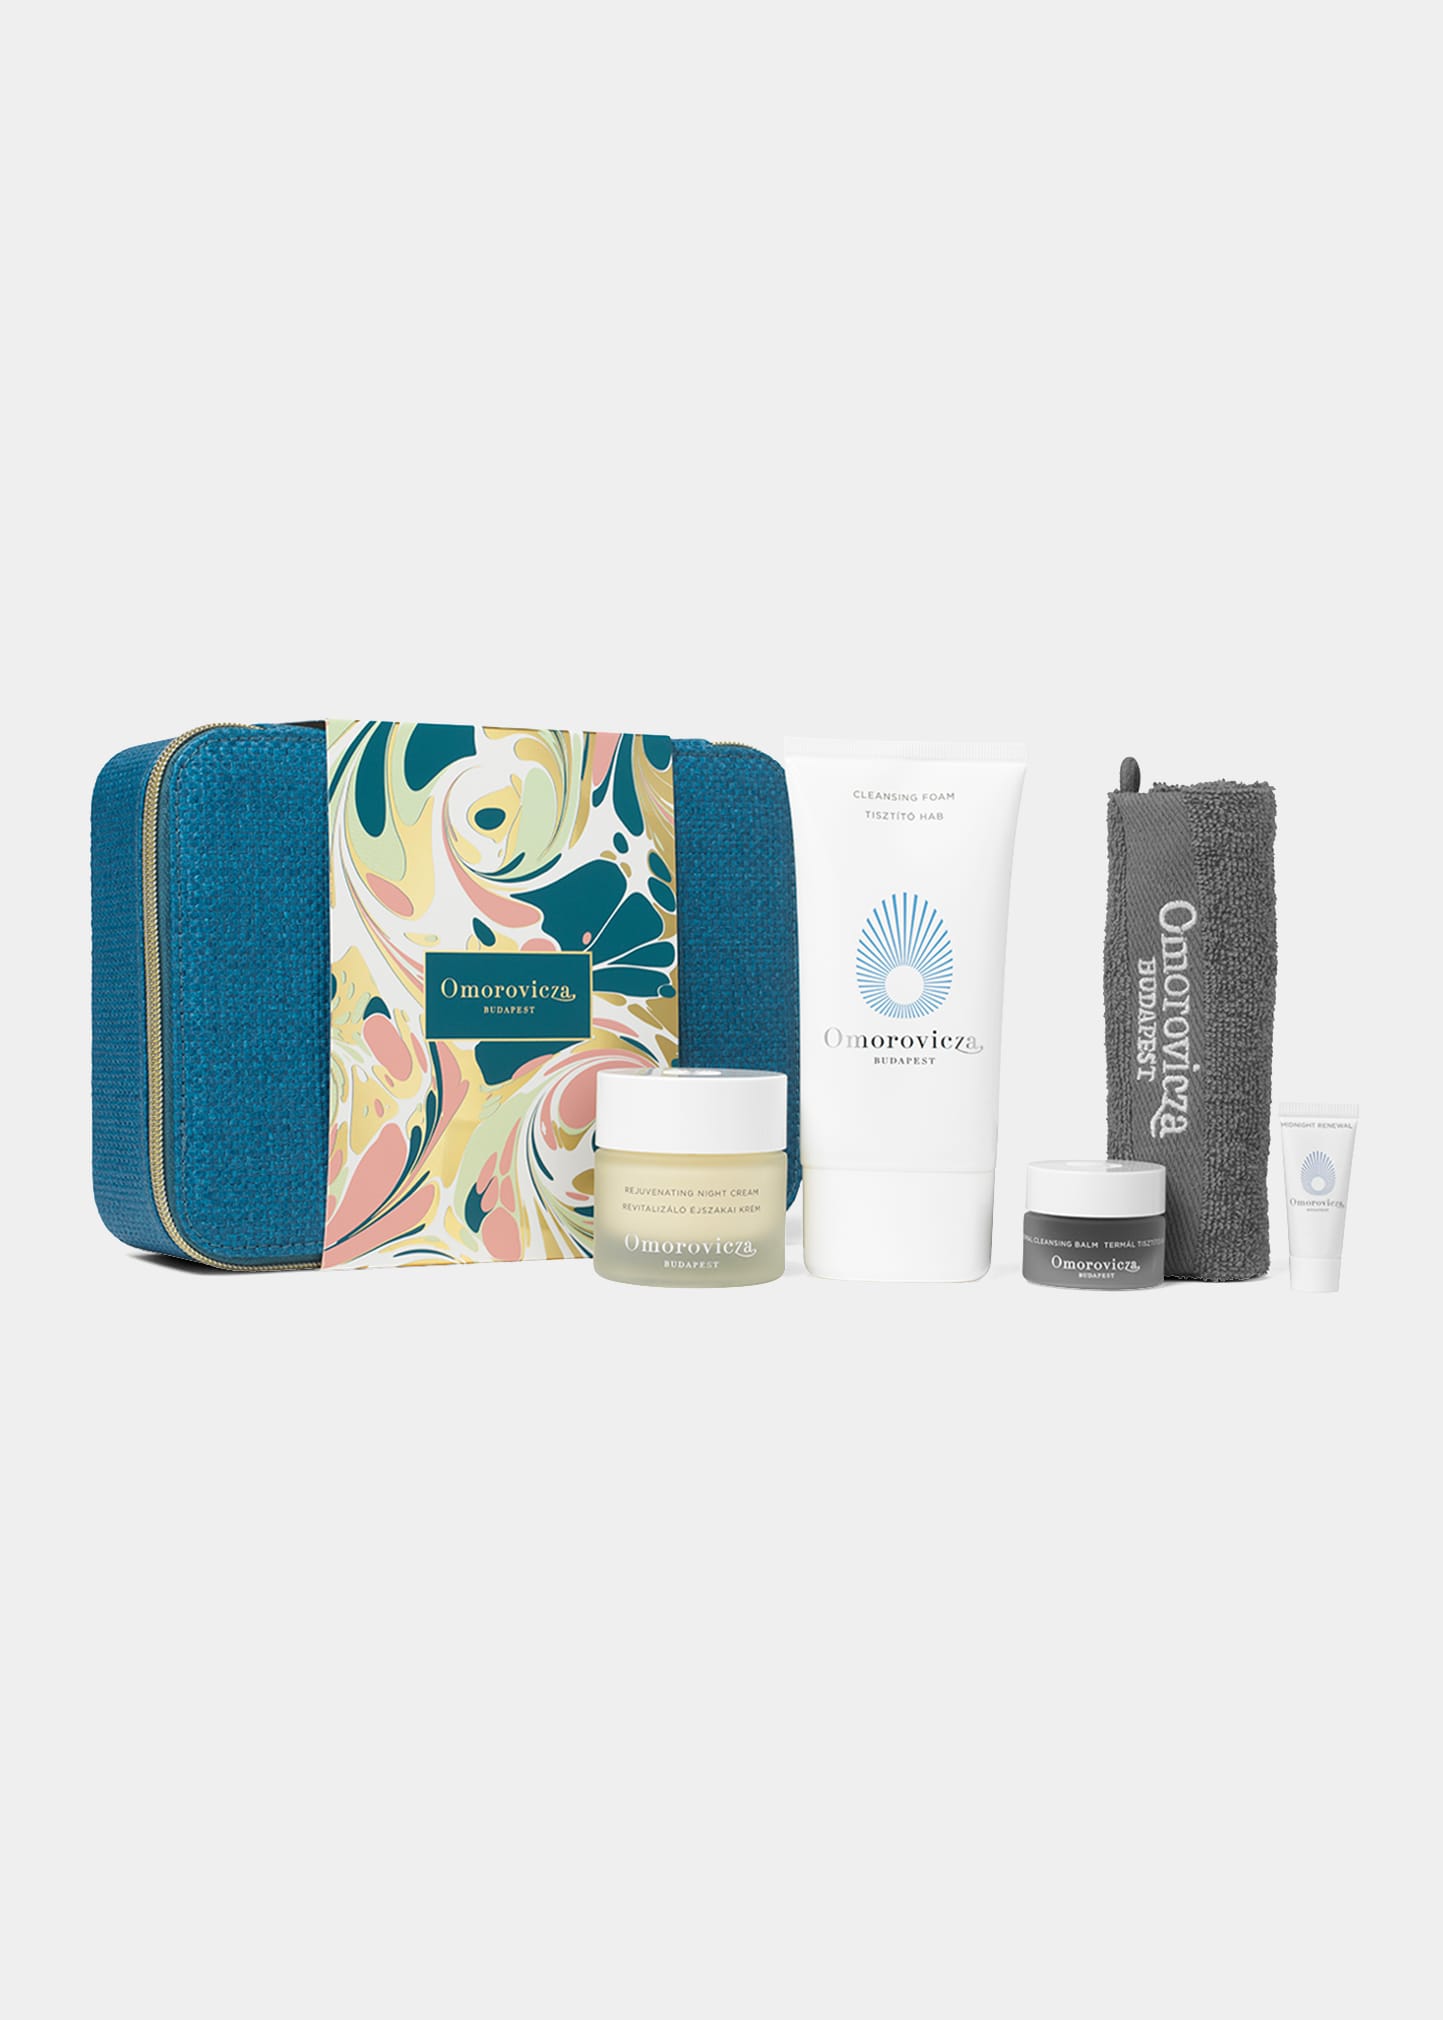 OMOROVICZA LIMITED EDITION THE EVENING FACIAL SET ($399 VALUE)